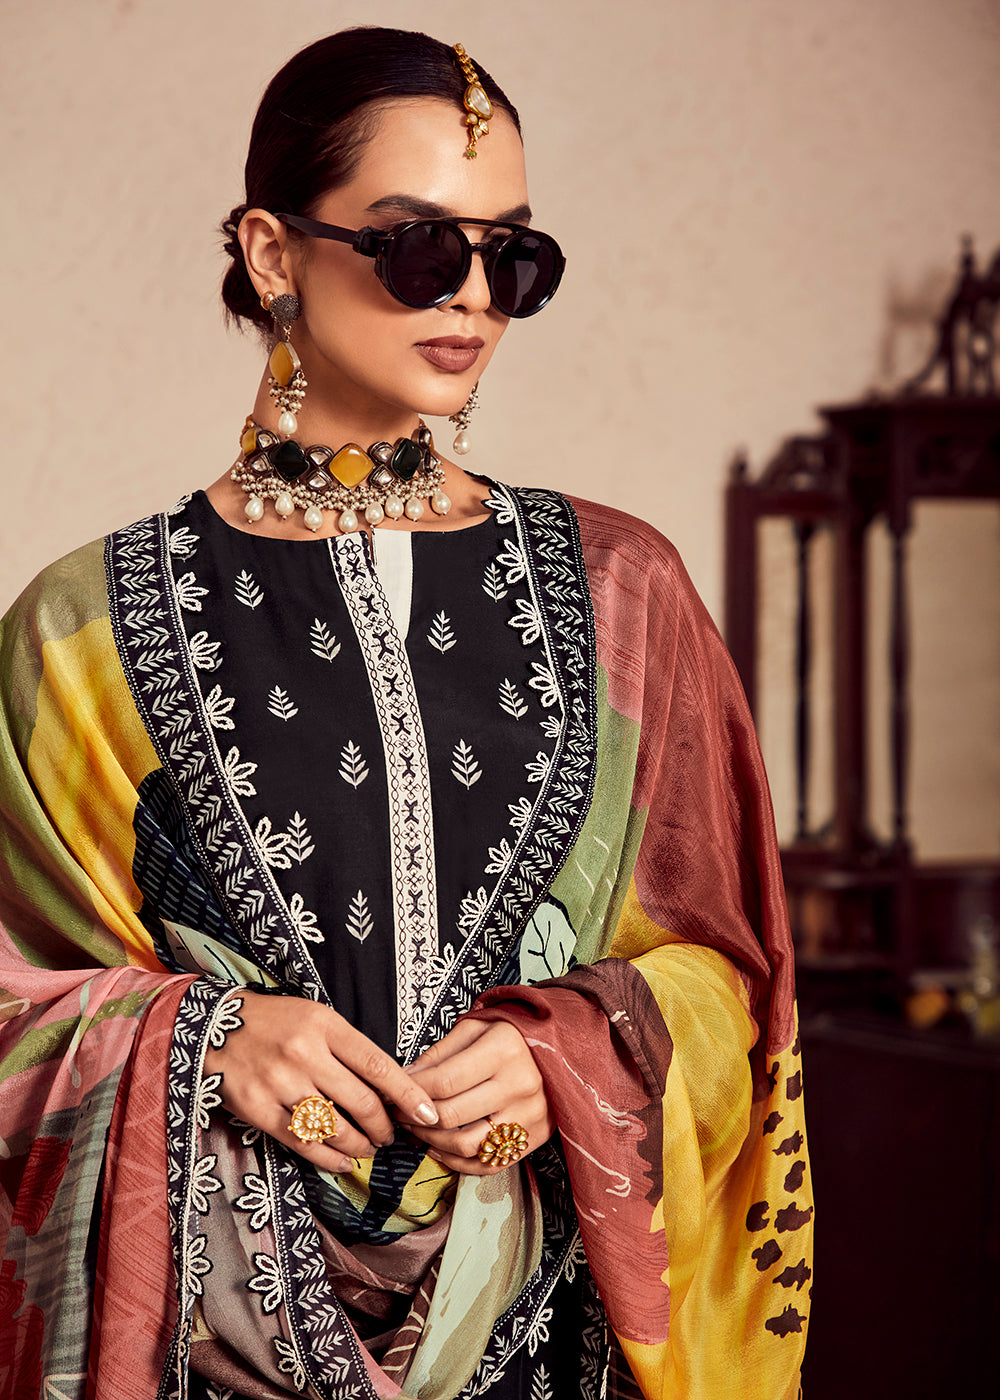 Buy Now Muslin Cotton Black Digital Print & Embroidered Salwar Suit Online in USA, UK, Canada, Germany, Australia & Worldwide at Empress Clothing.